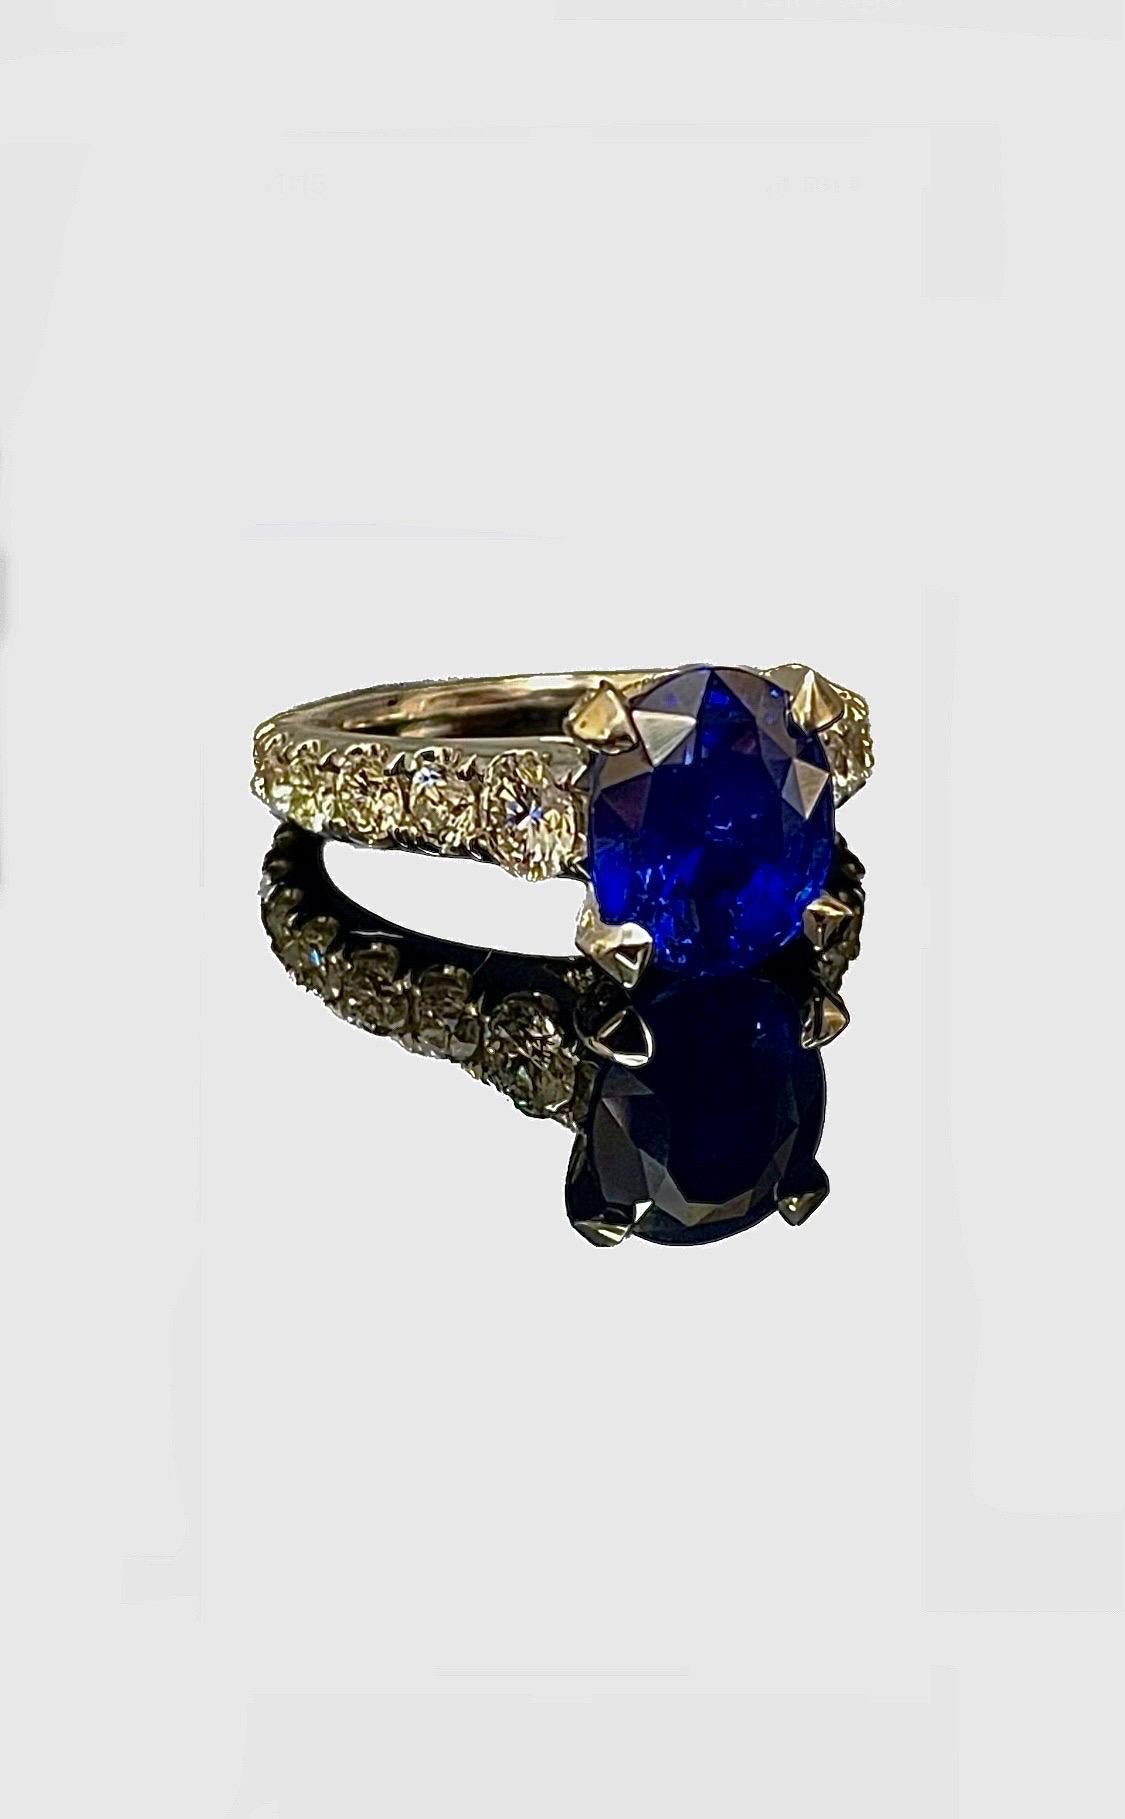 DeKara Design Collection 

Metal- 18K White Gold, .750.

Stones- GIA Certified 4.02 Carat No Heat Oval Blue Sapphire, 52 Round Diamonds G-H Color VS2 Clarity 1.60 carats.

GIA Report Number 6227026772


Size- 6.  FREE SIZING!!!!

This Roayl Blue No